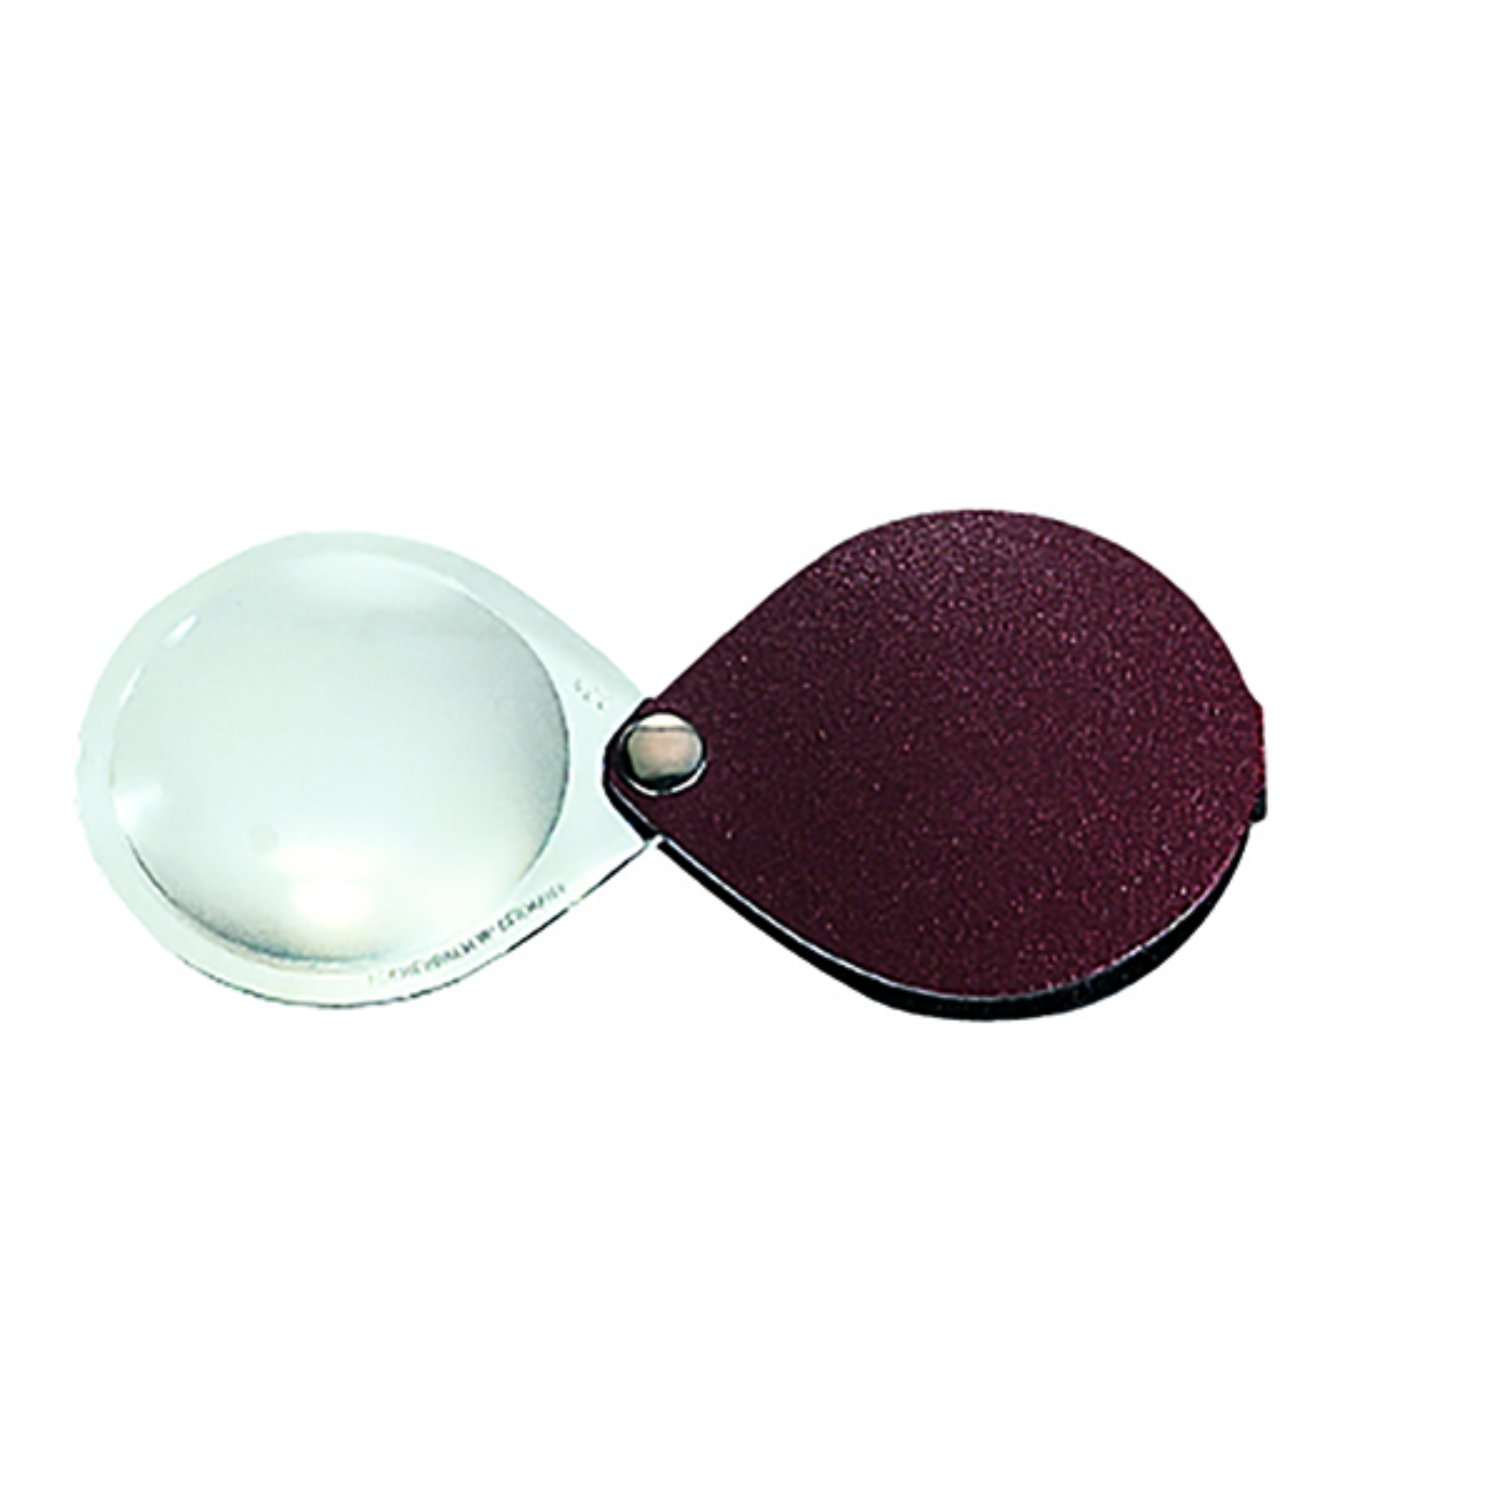 Image of a red classic round folding pocket magnifier from Eschenbach Optik